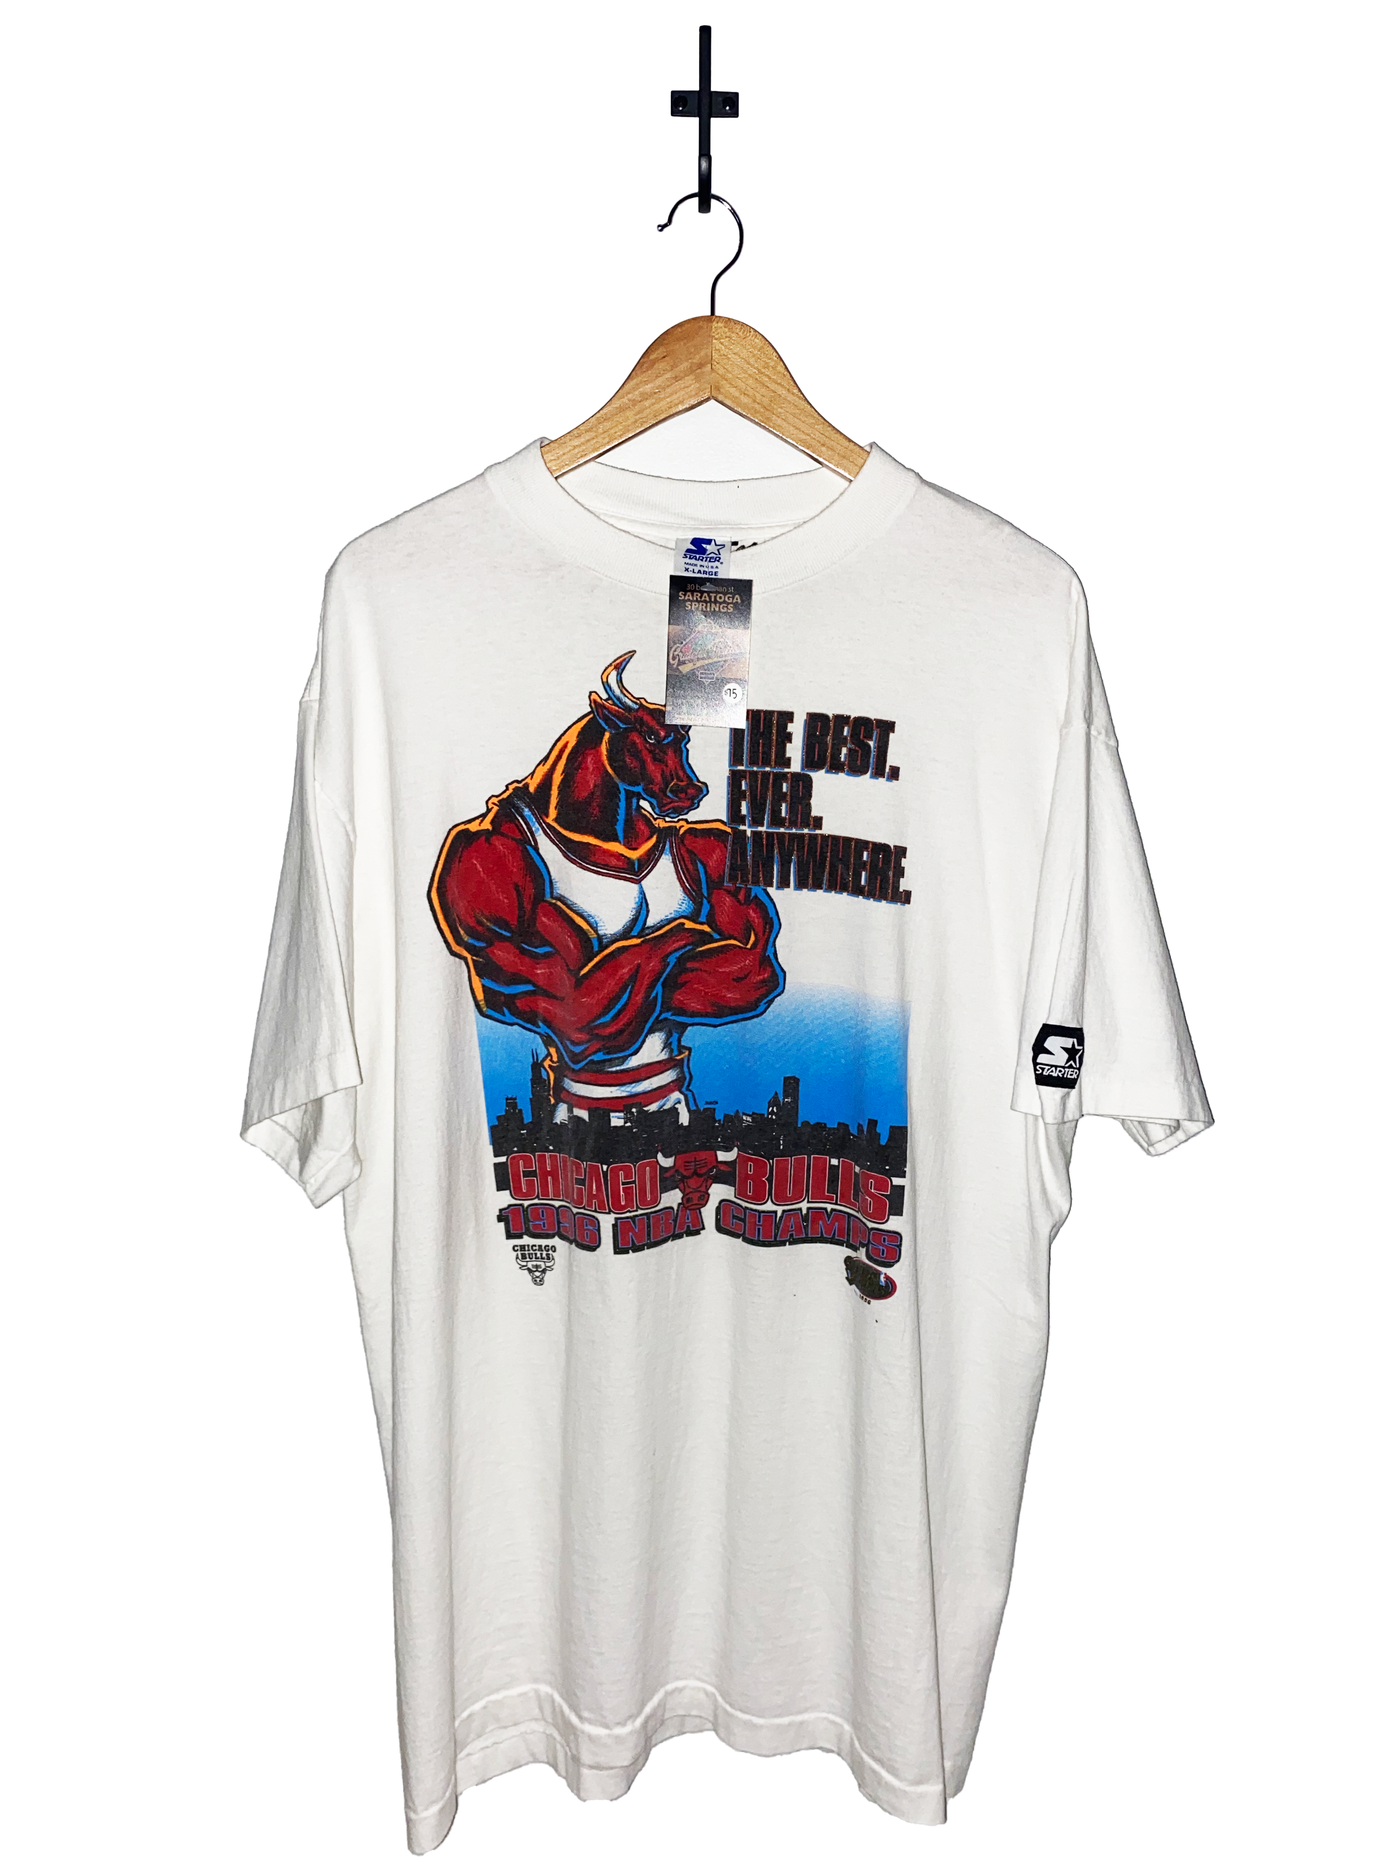 Vintage 1996 Chicago Bulls ‘The Best Ever, Anywhere’ T-Shirt